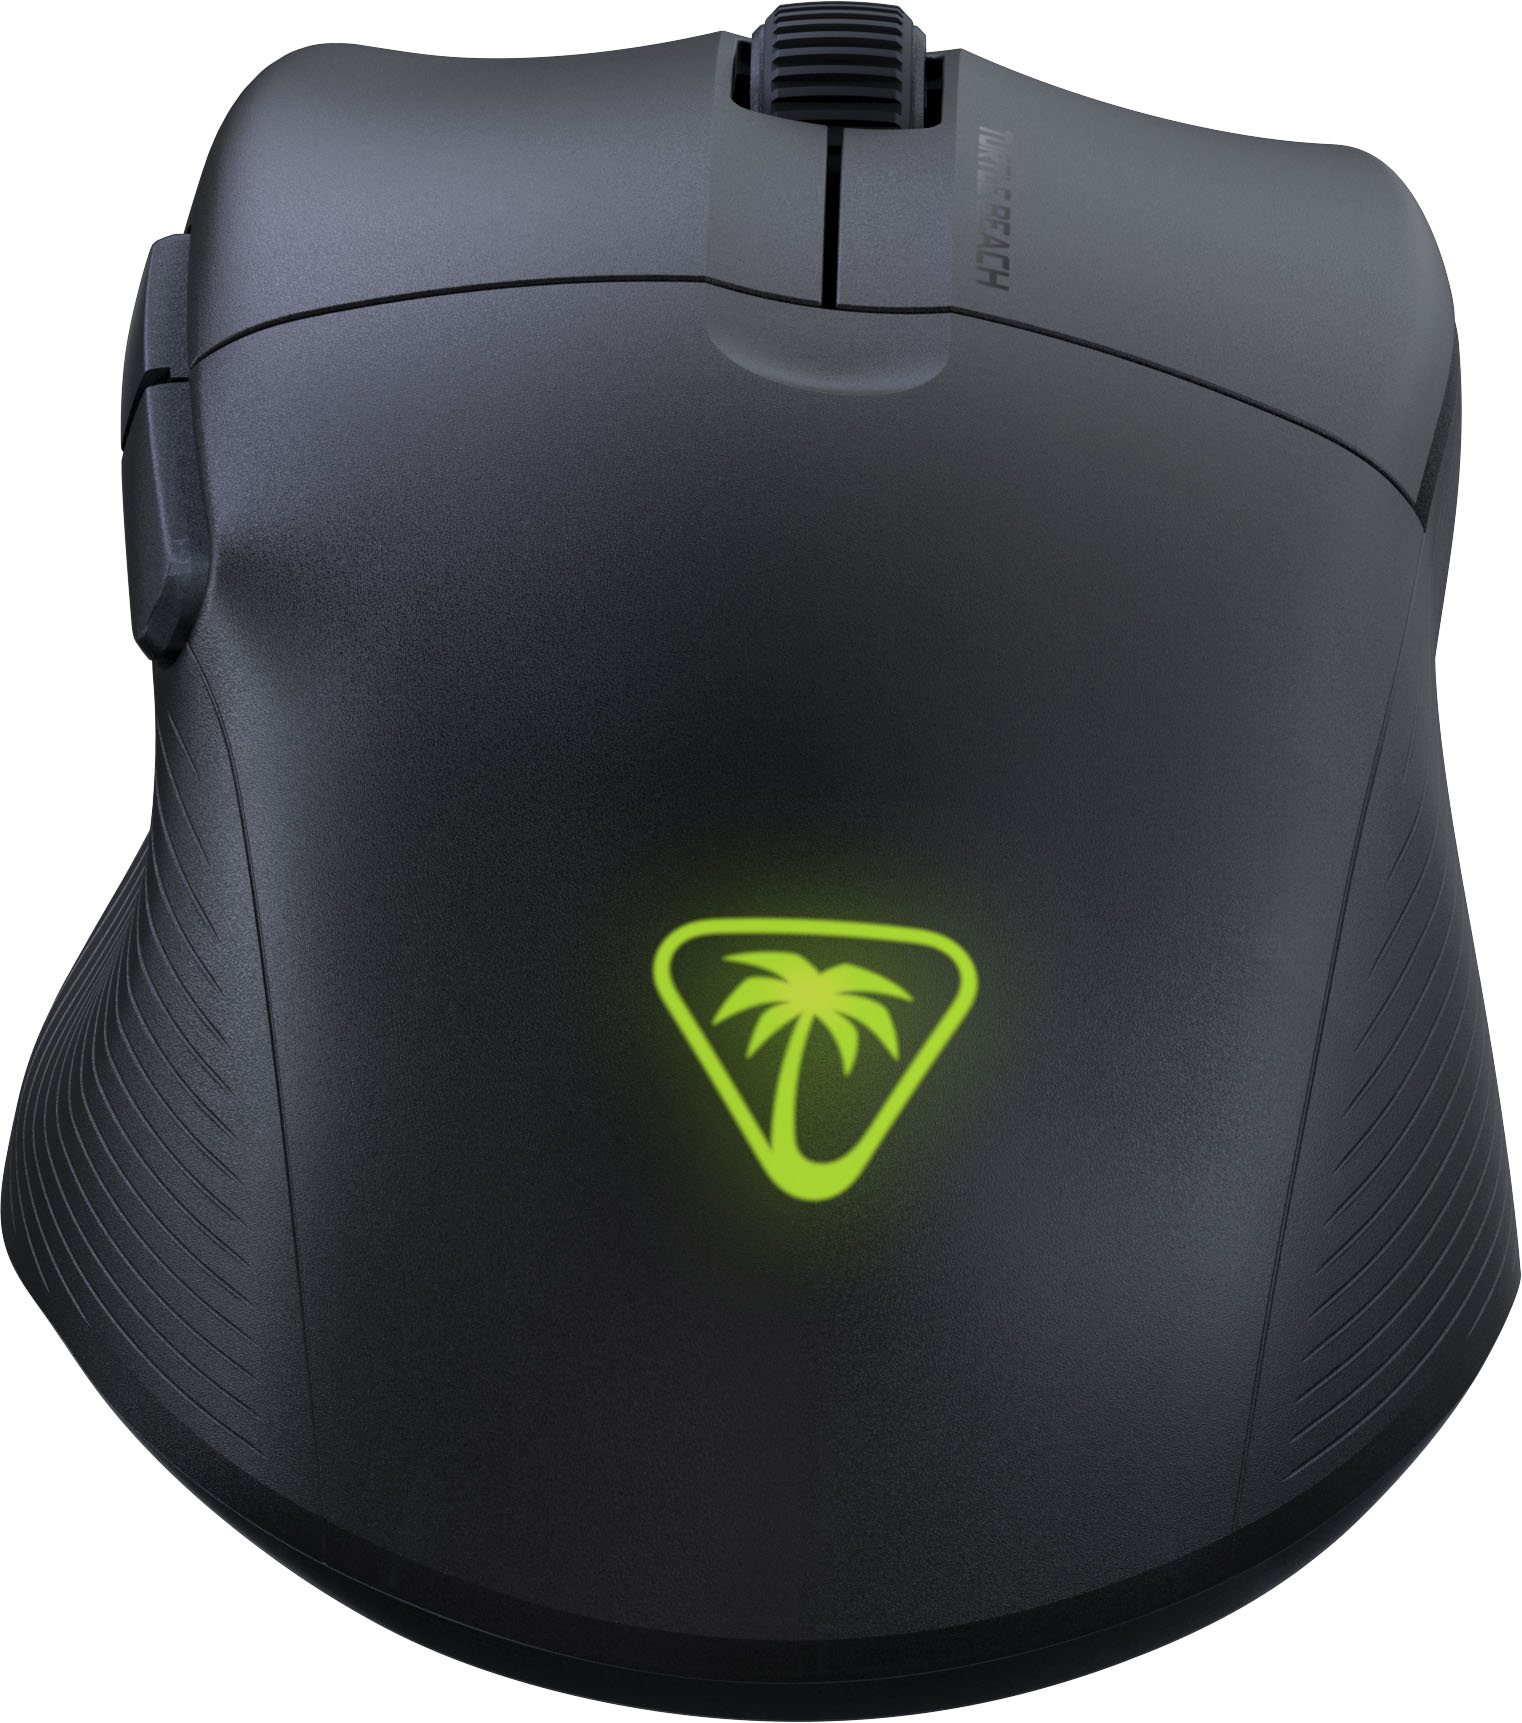 Back View: Turtle Beach - Pure Air Ultra-Light Wireless Ergonomic RGB Gaming Mouse with 26K DPI Optical Sensor & 125 hour Battery - Black